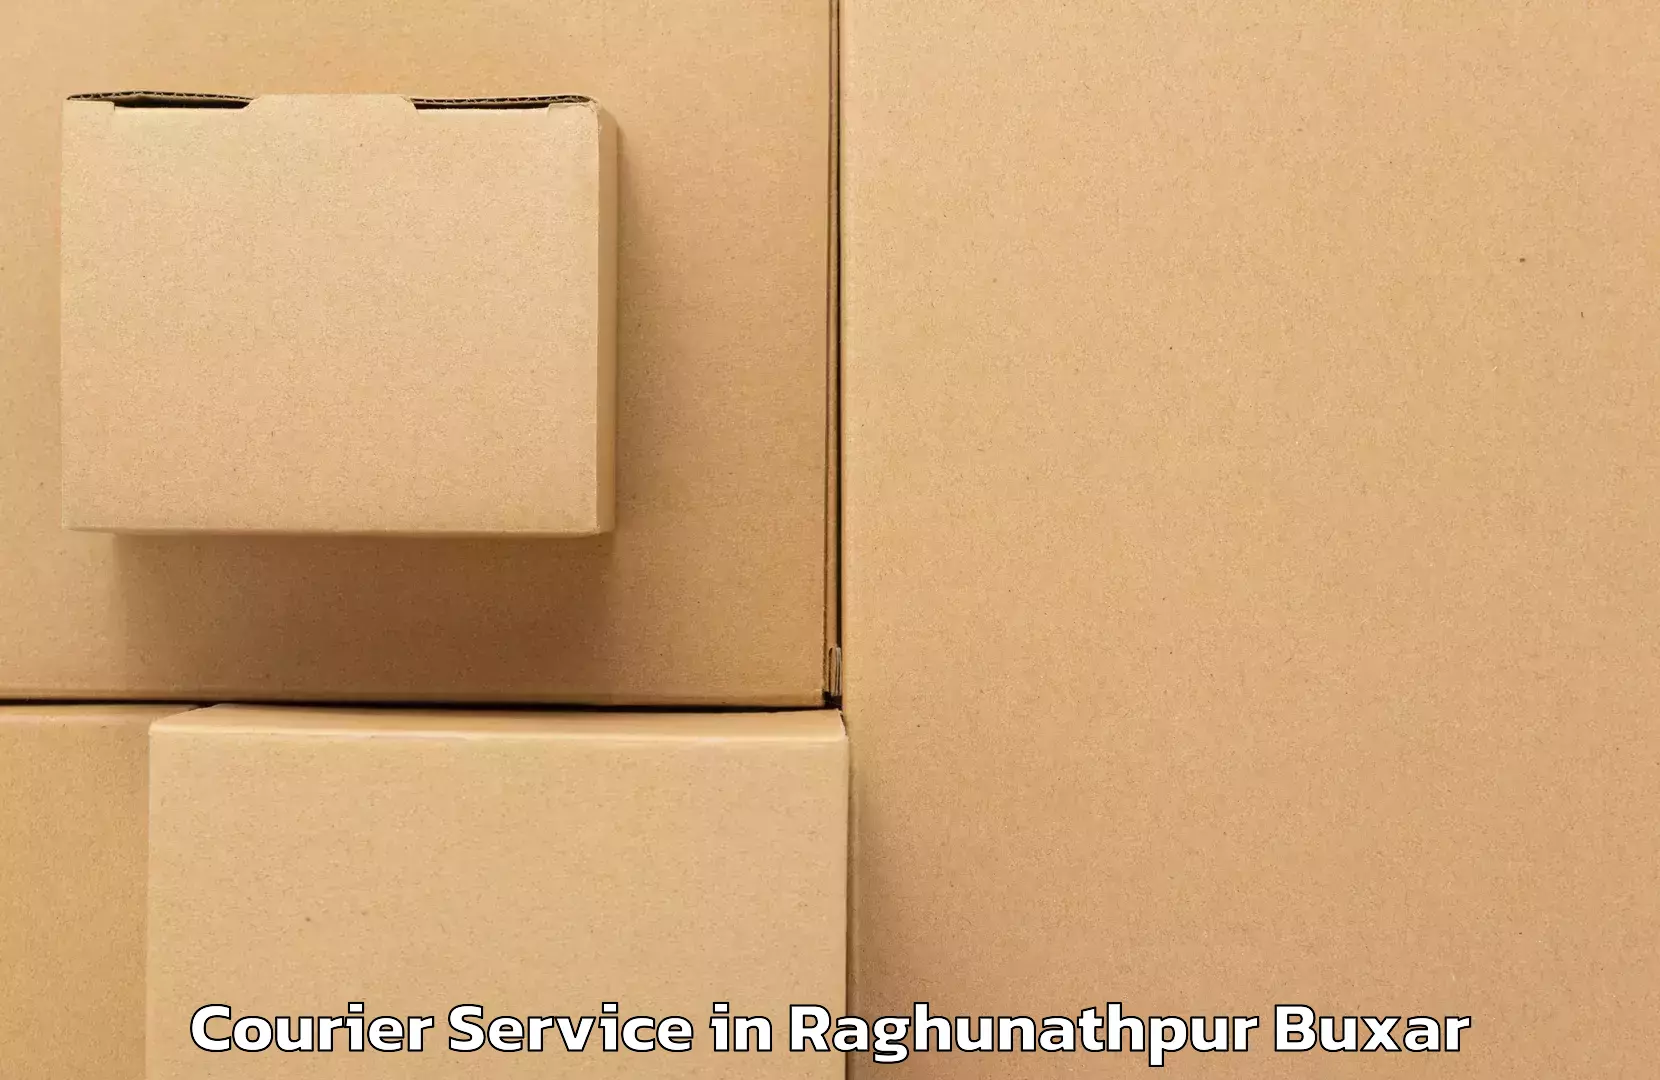 Secure freight services in Raghunathpur Buxar